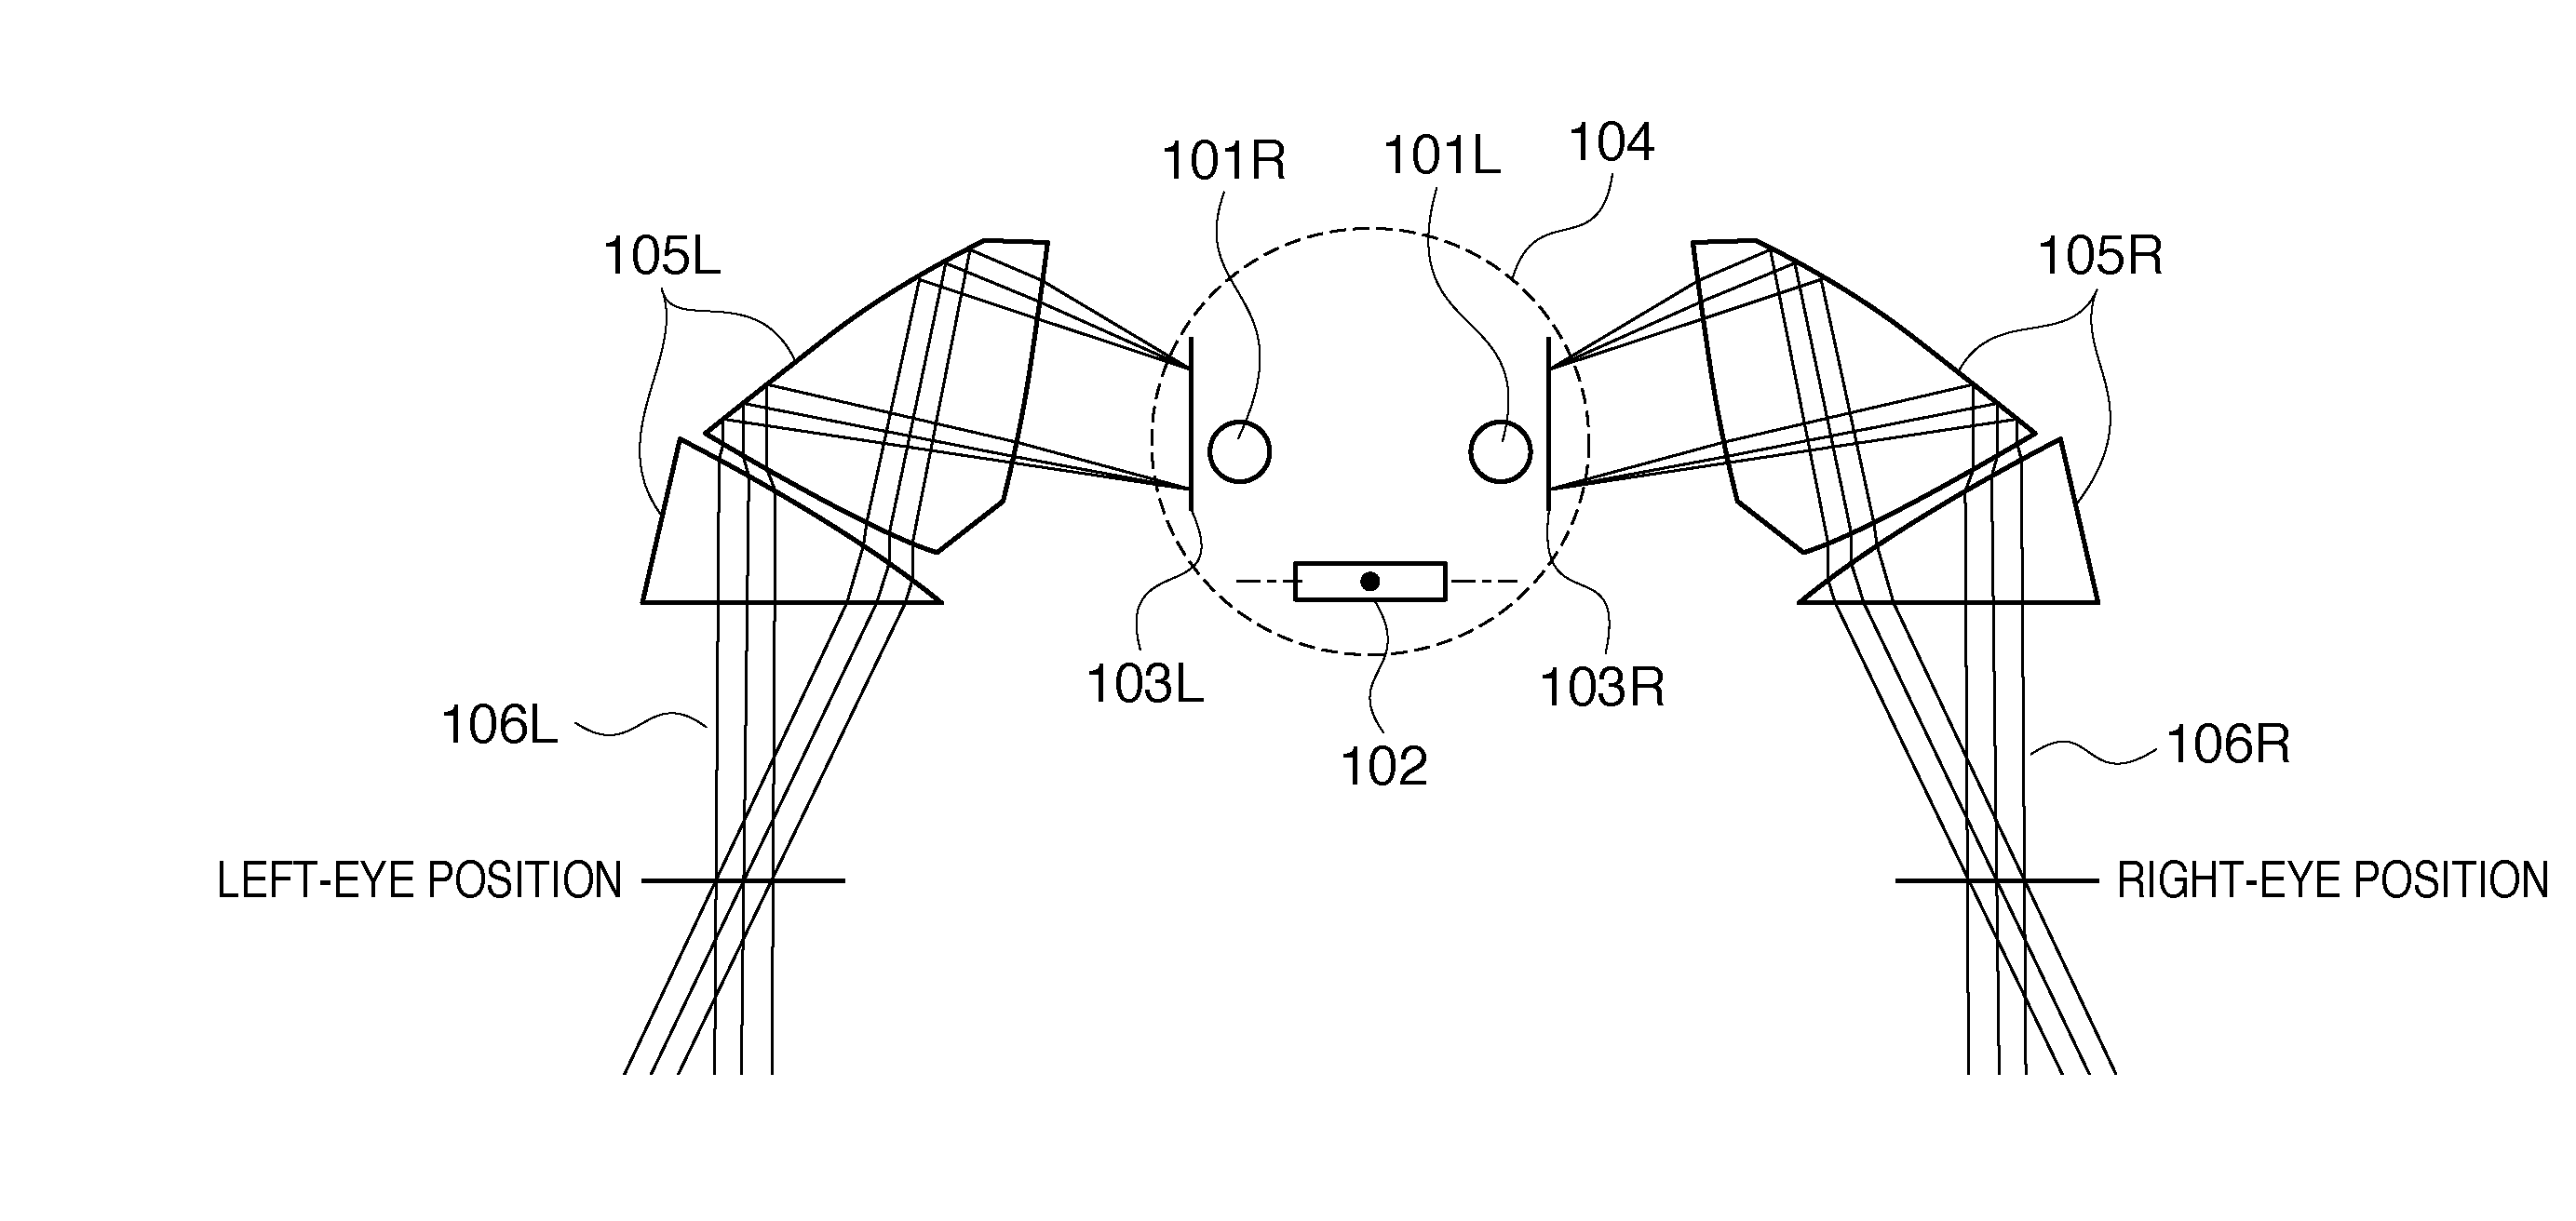 Image display apparatus and method of controlling the same